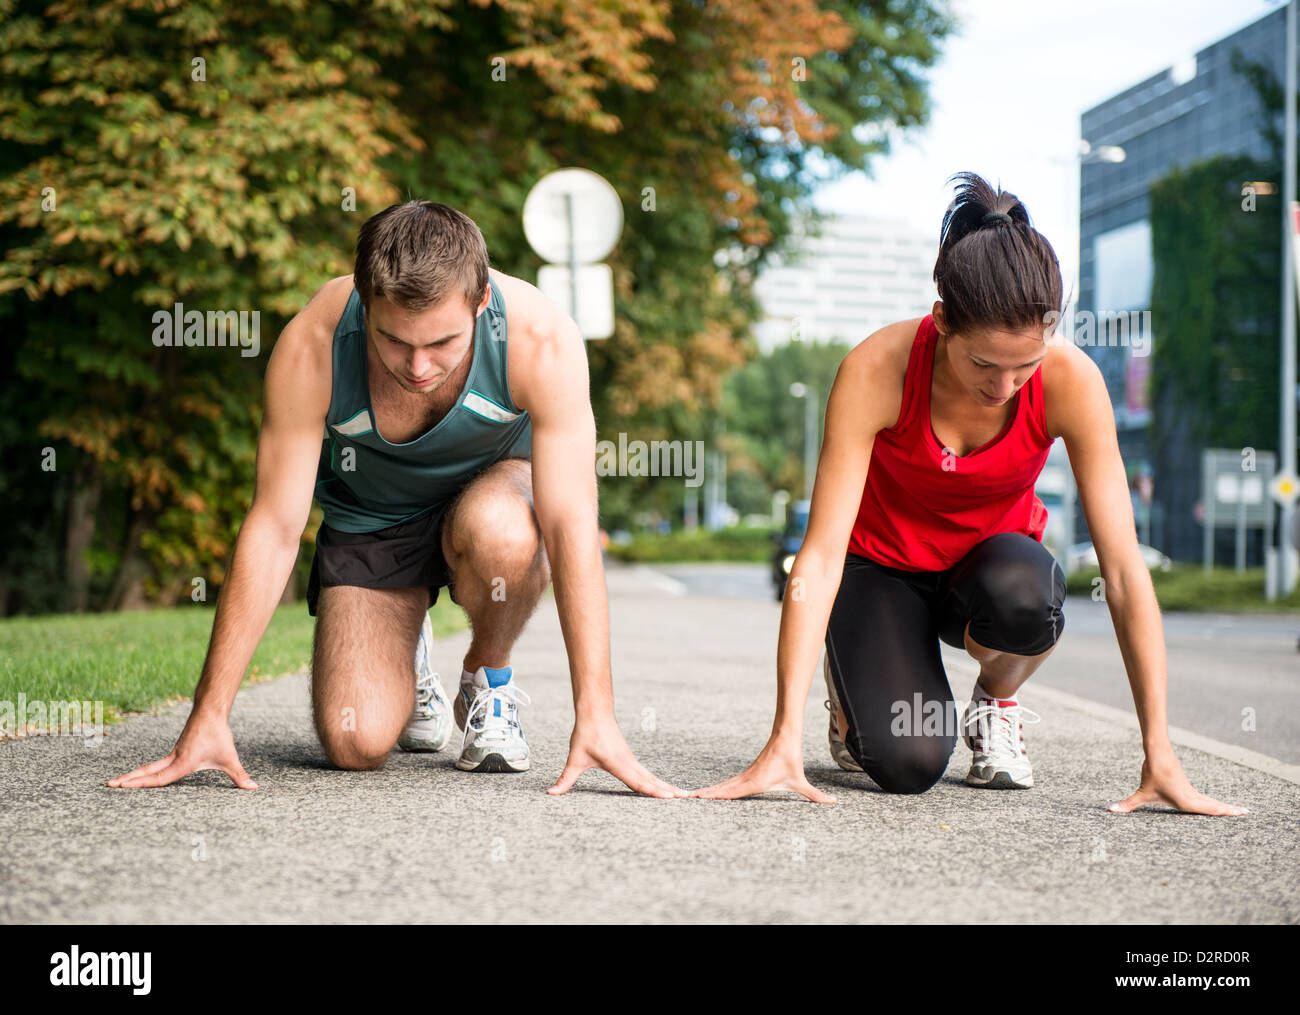 Young sport couple in starting postion prepared to compete and run Stock Photo